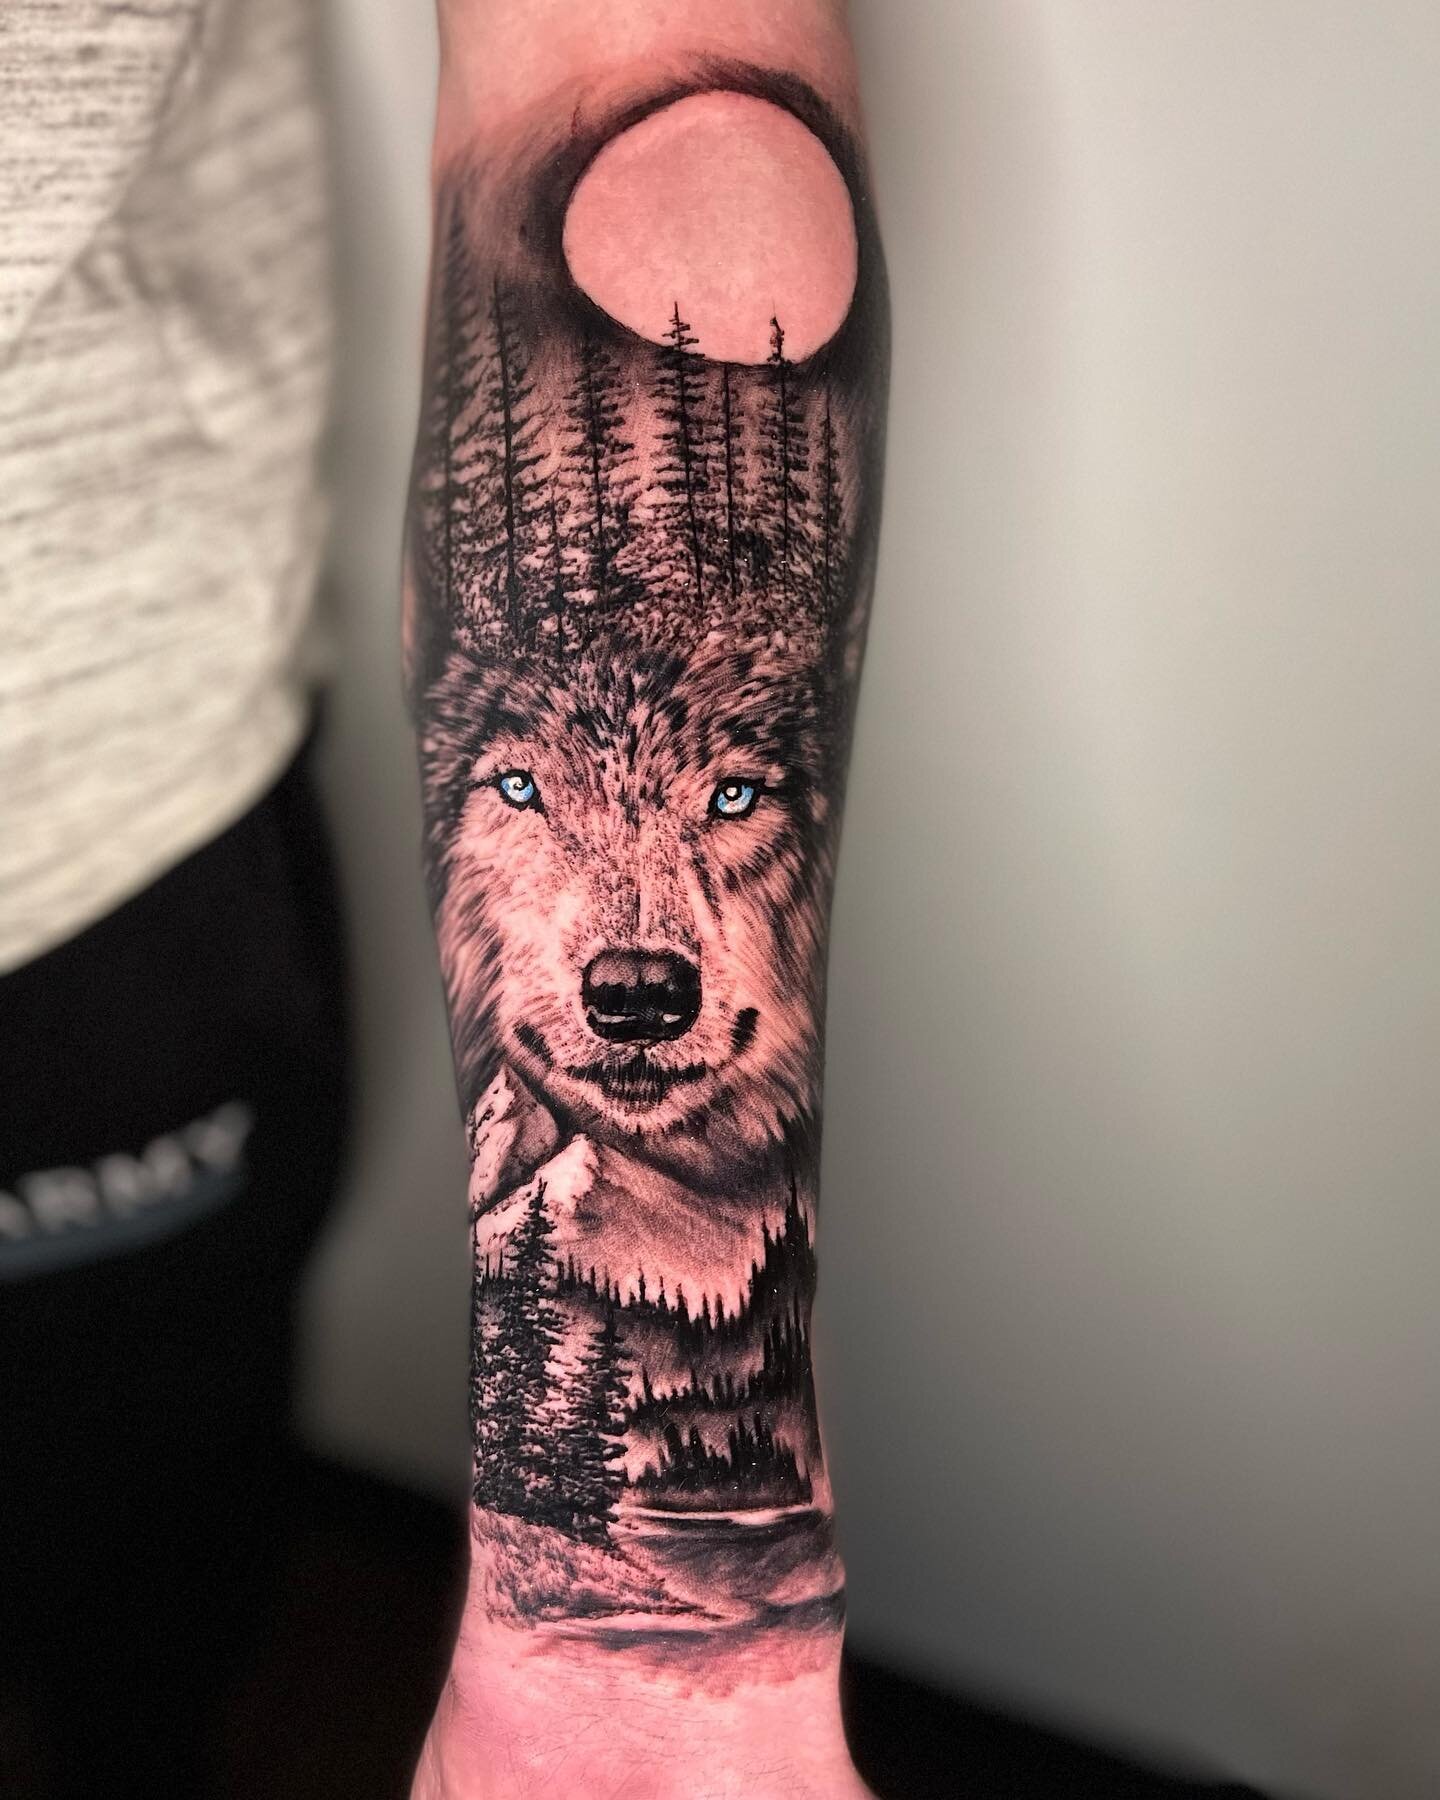 First official piece at the new shop in the books 😁✍️ can&rsquo;t wait to keep rocking out more dope tattoos here with my old and new clients! Hit me up for appointments in the link below 👇✨👇 https://www.sharktoothtattoo.com/tattoorequest  #tattoo